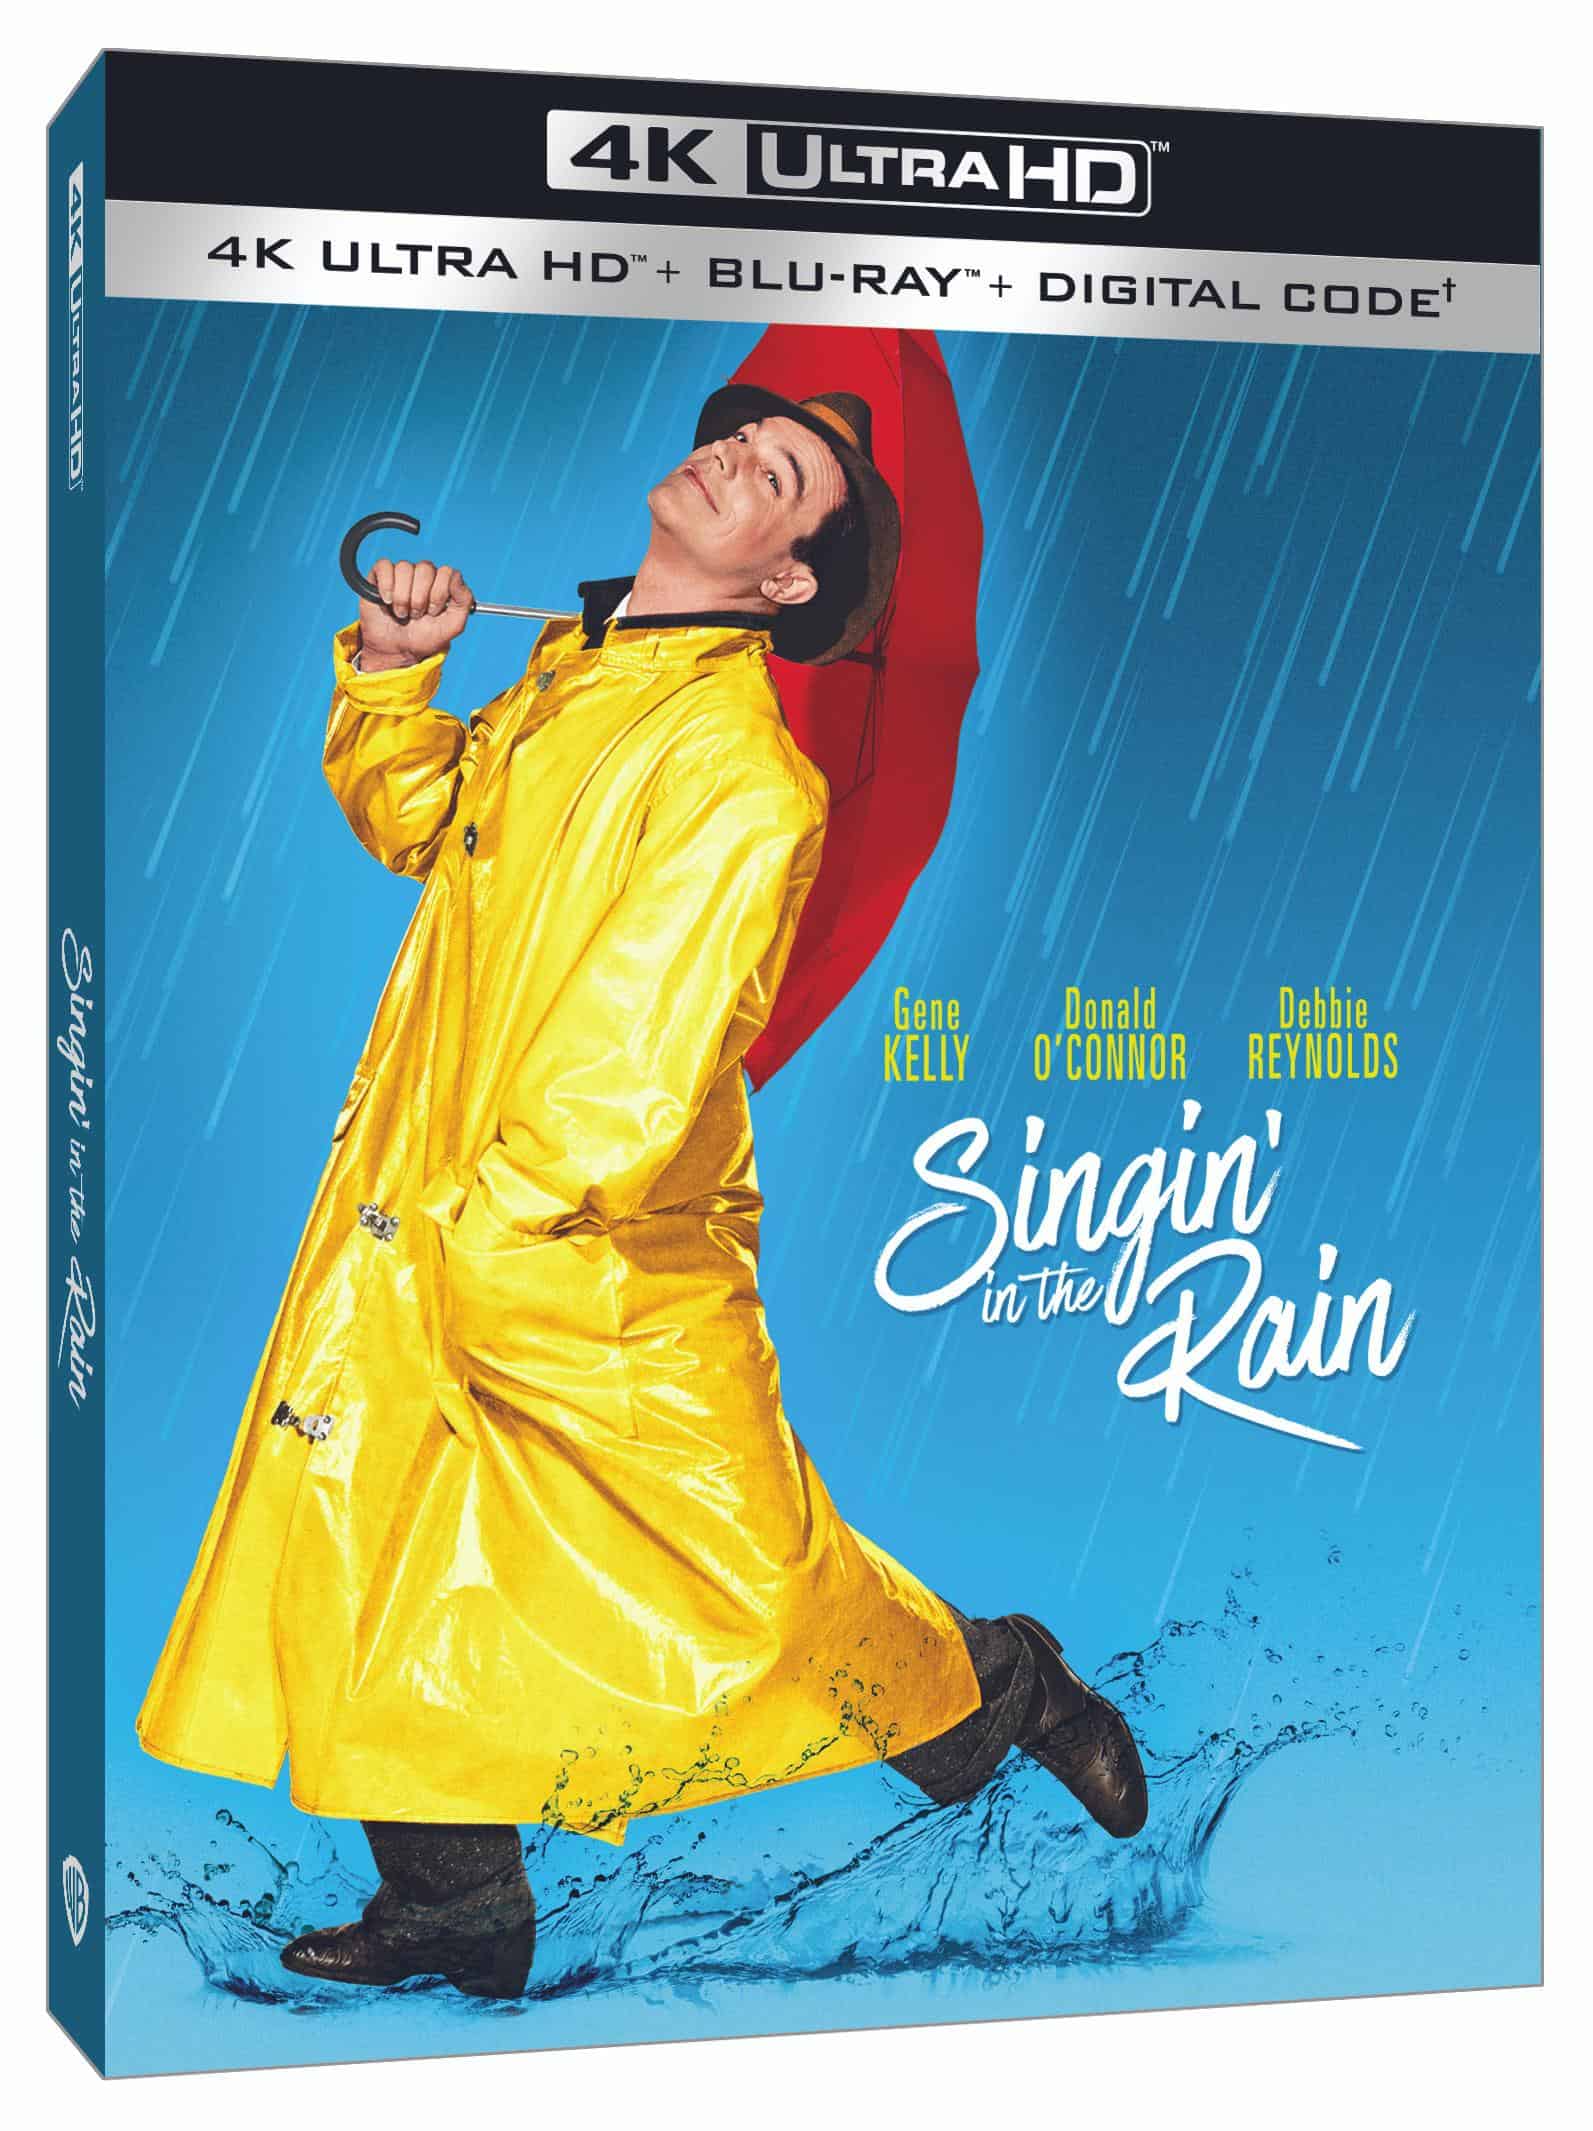 Singin in the Rain sings its way onto 4K UHD on April 26th 3